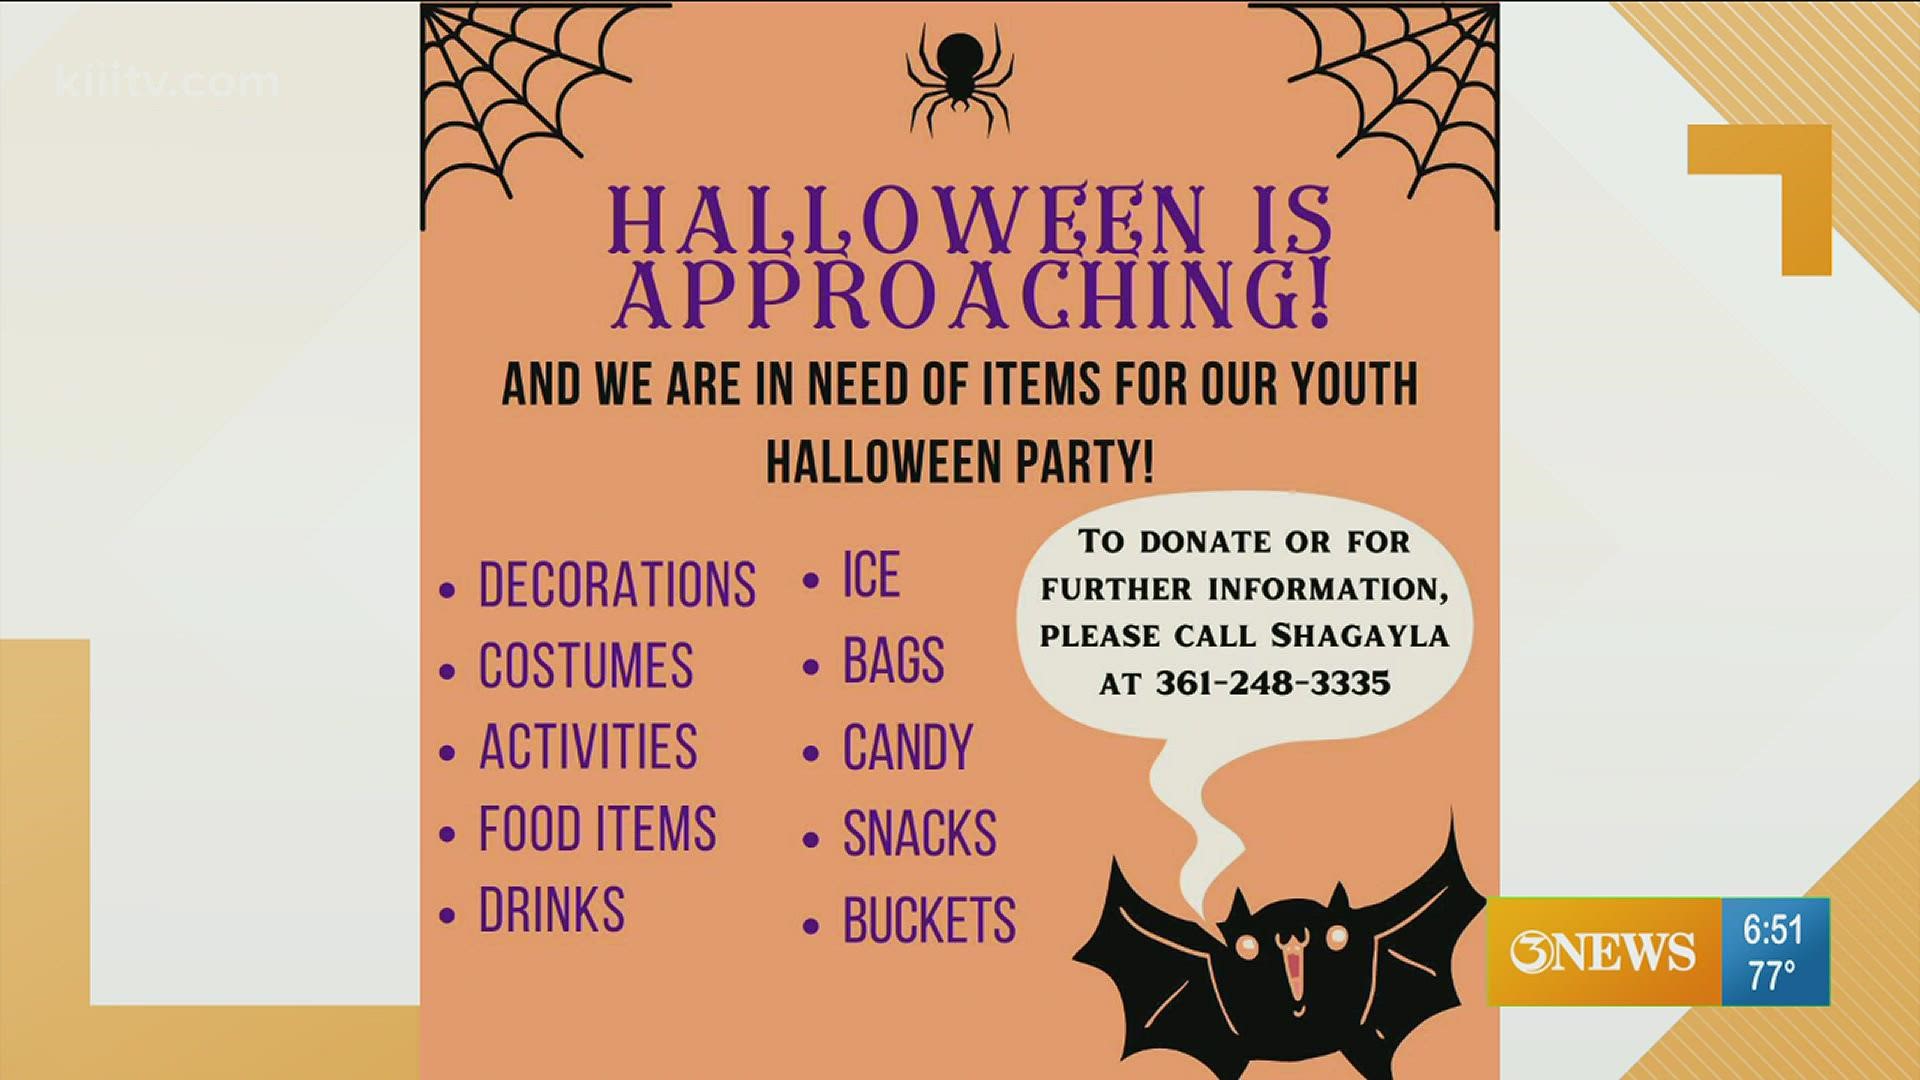 Donations are needed including decorations, costumes, candy and buckets.